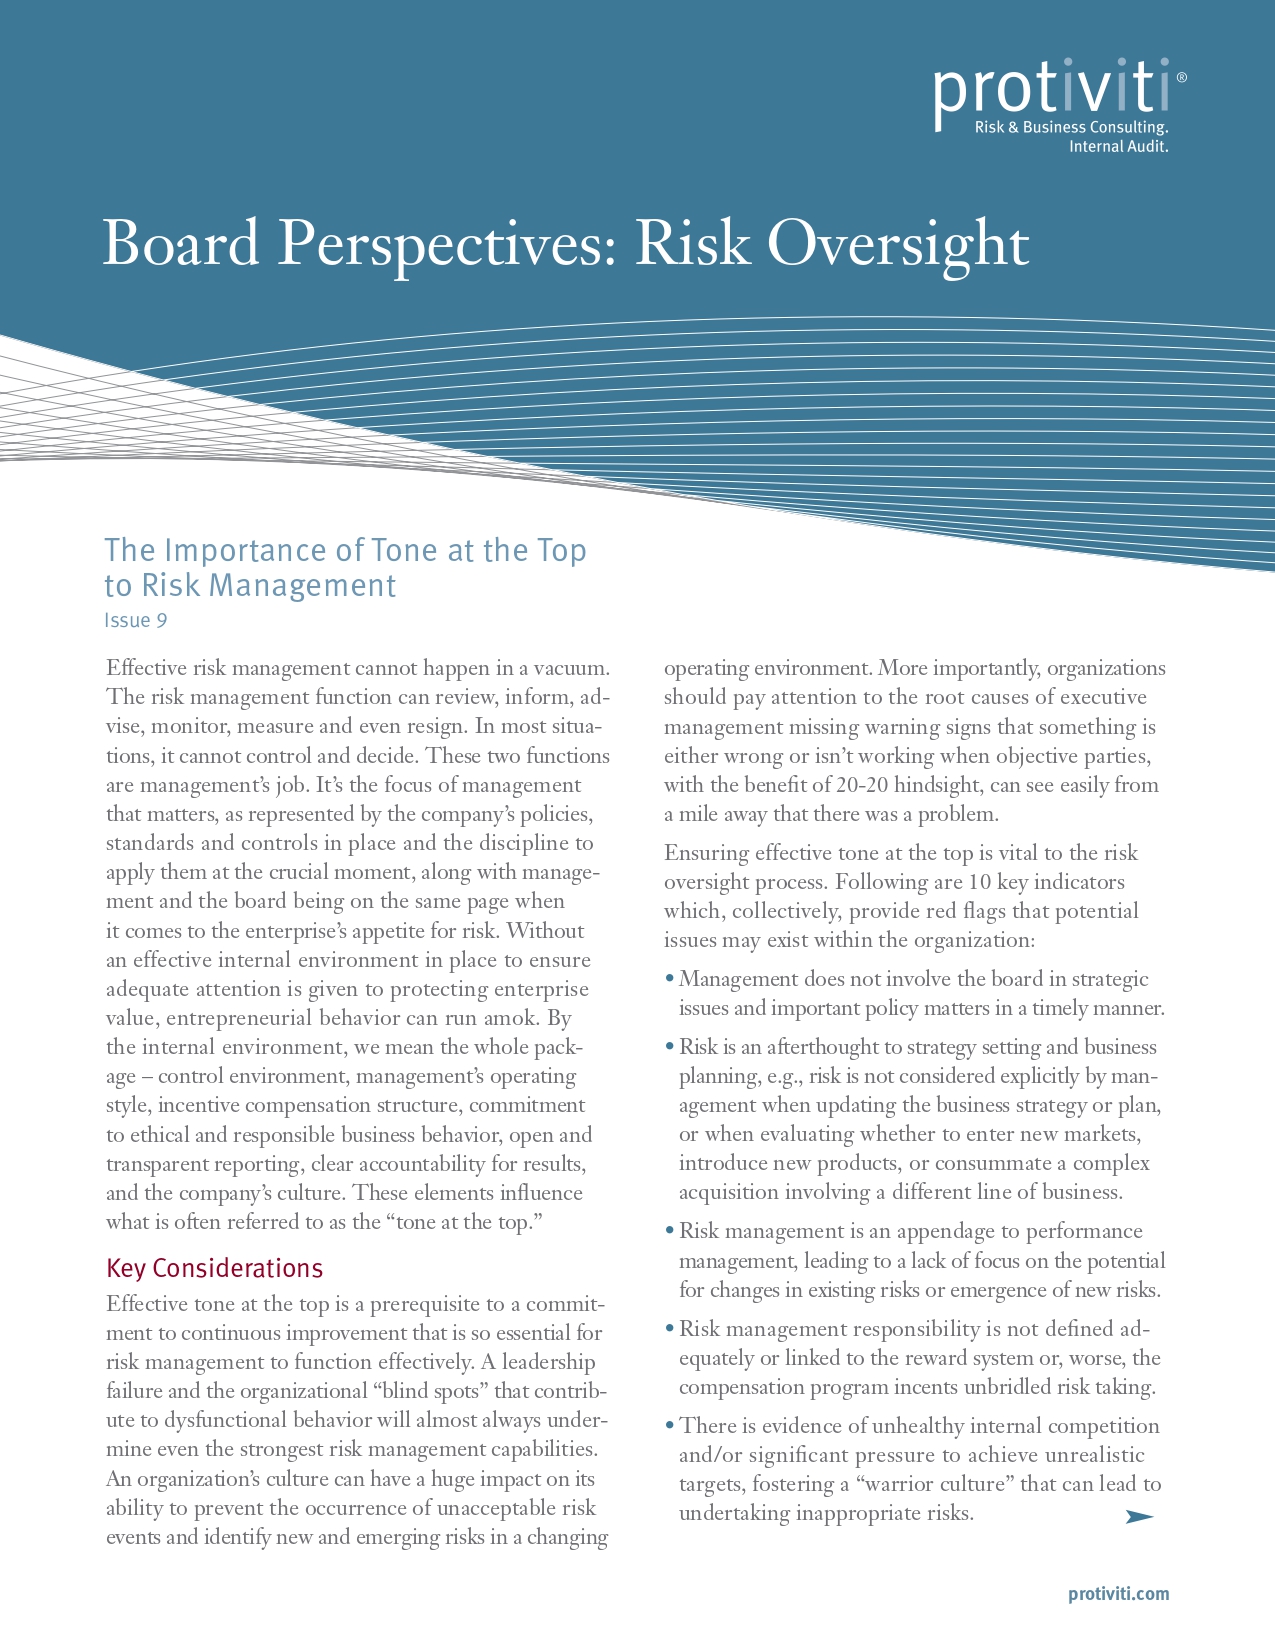 Screenshot of the first page of The Importance of Tone at the Top to Risk Management